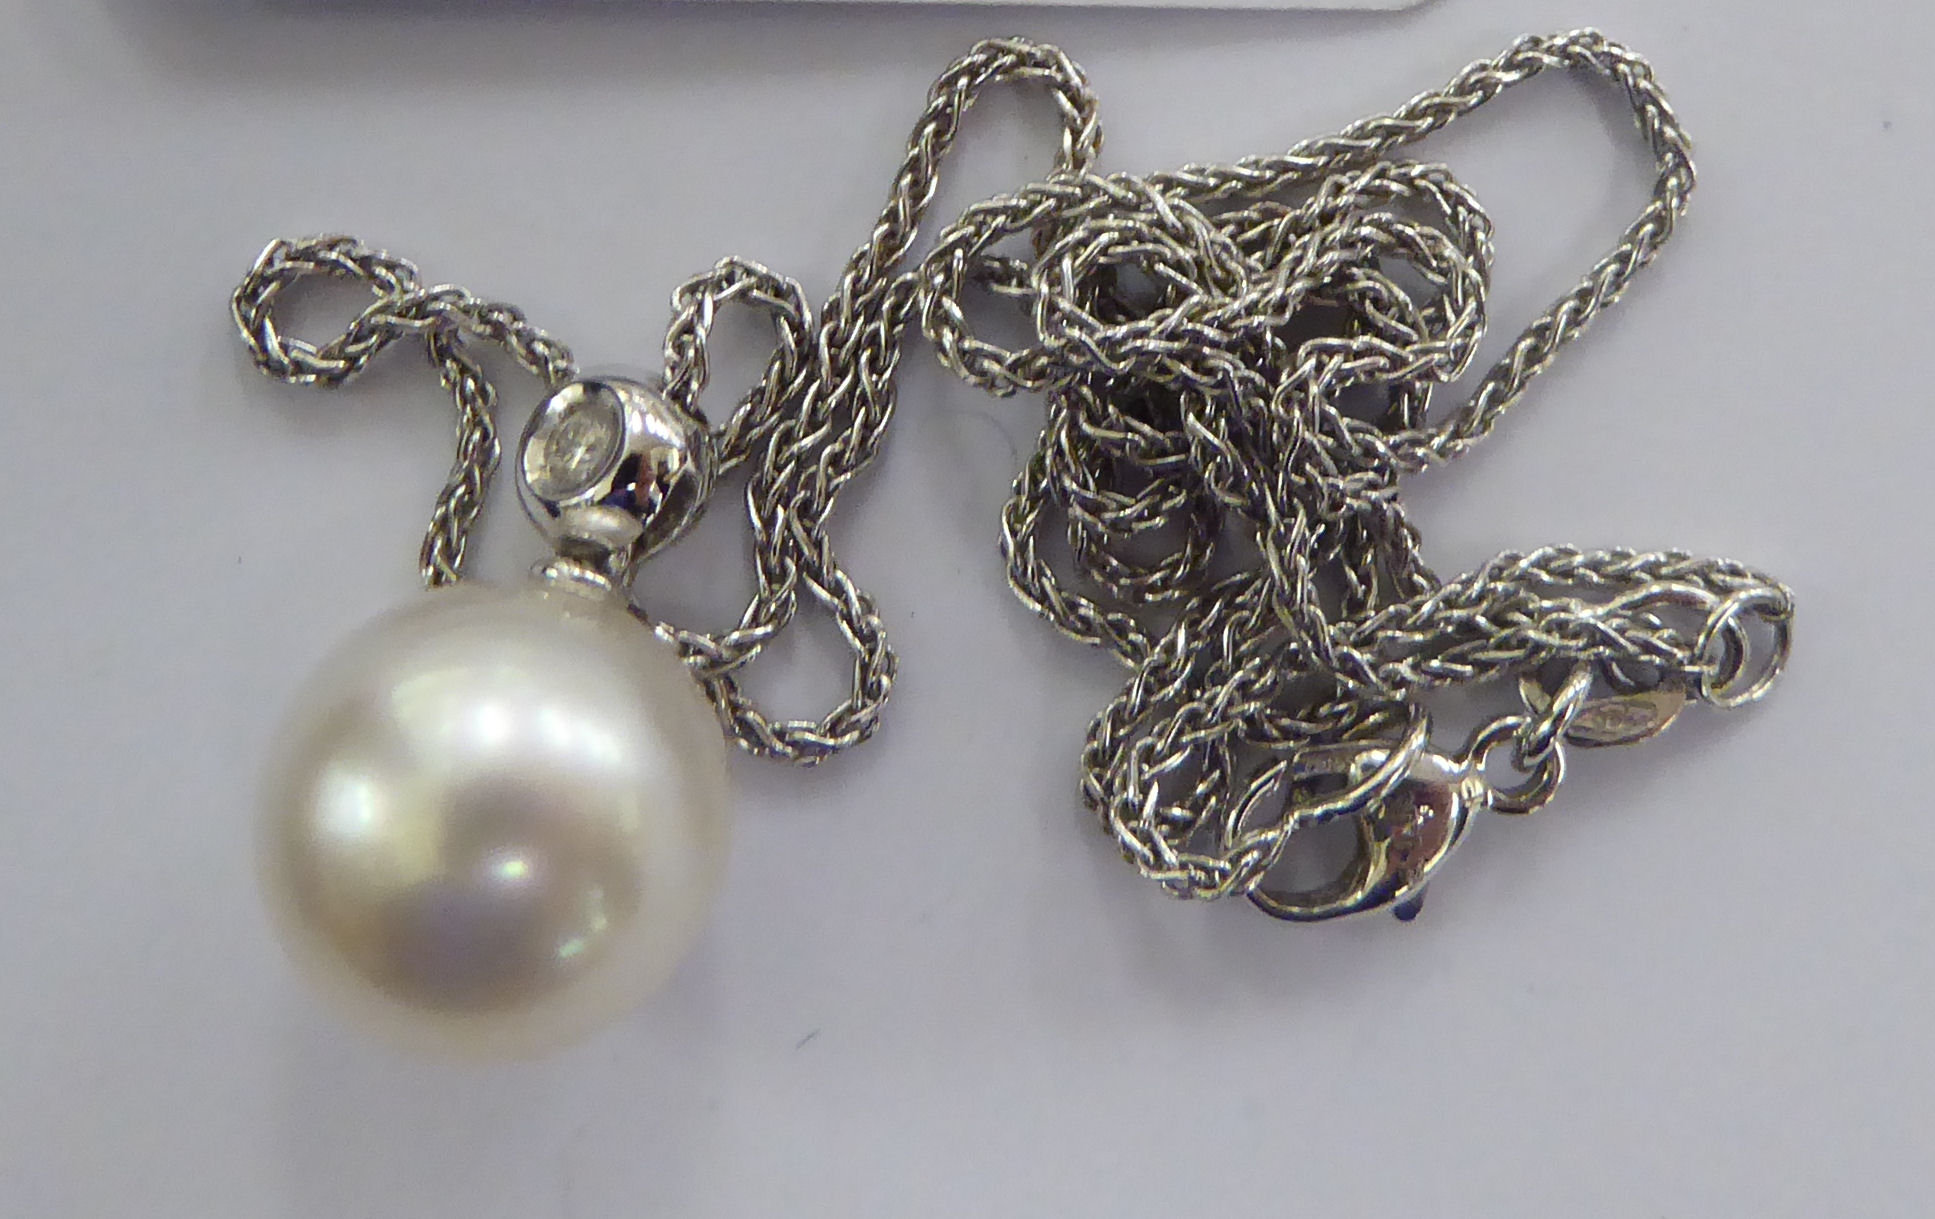 An 18ct white gold mounted, single pearl and diamond set pendant,